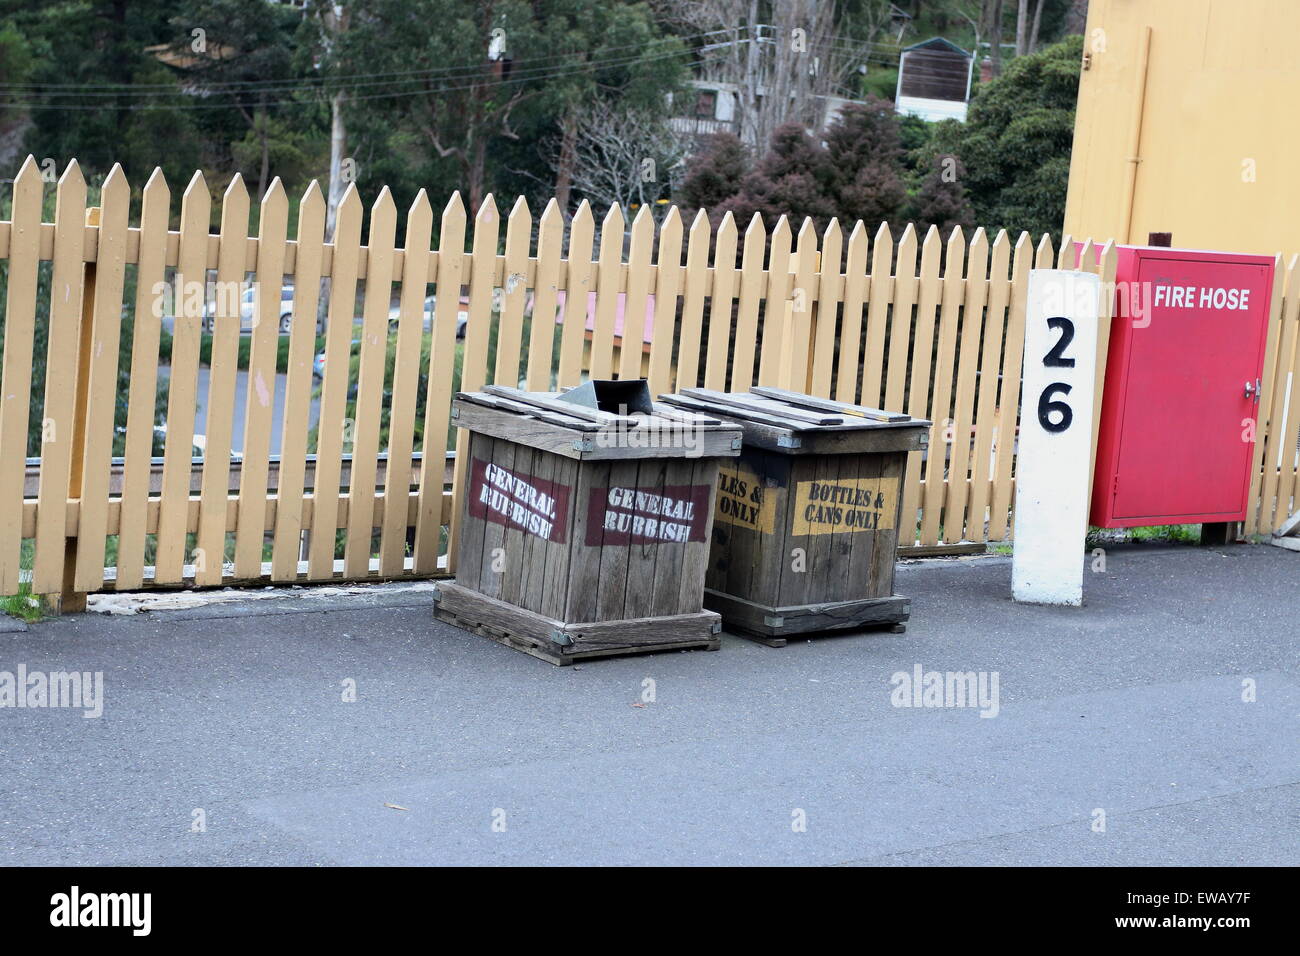 Classic wooden rubbish bins near wooden fence Stock Photo